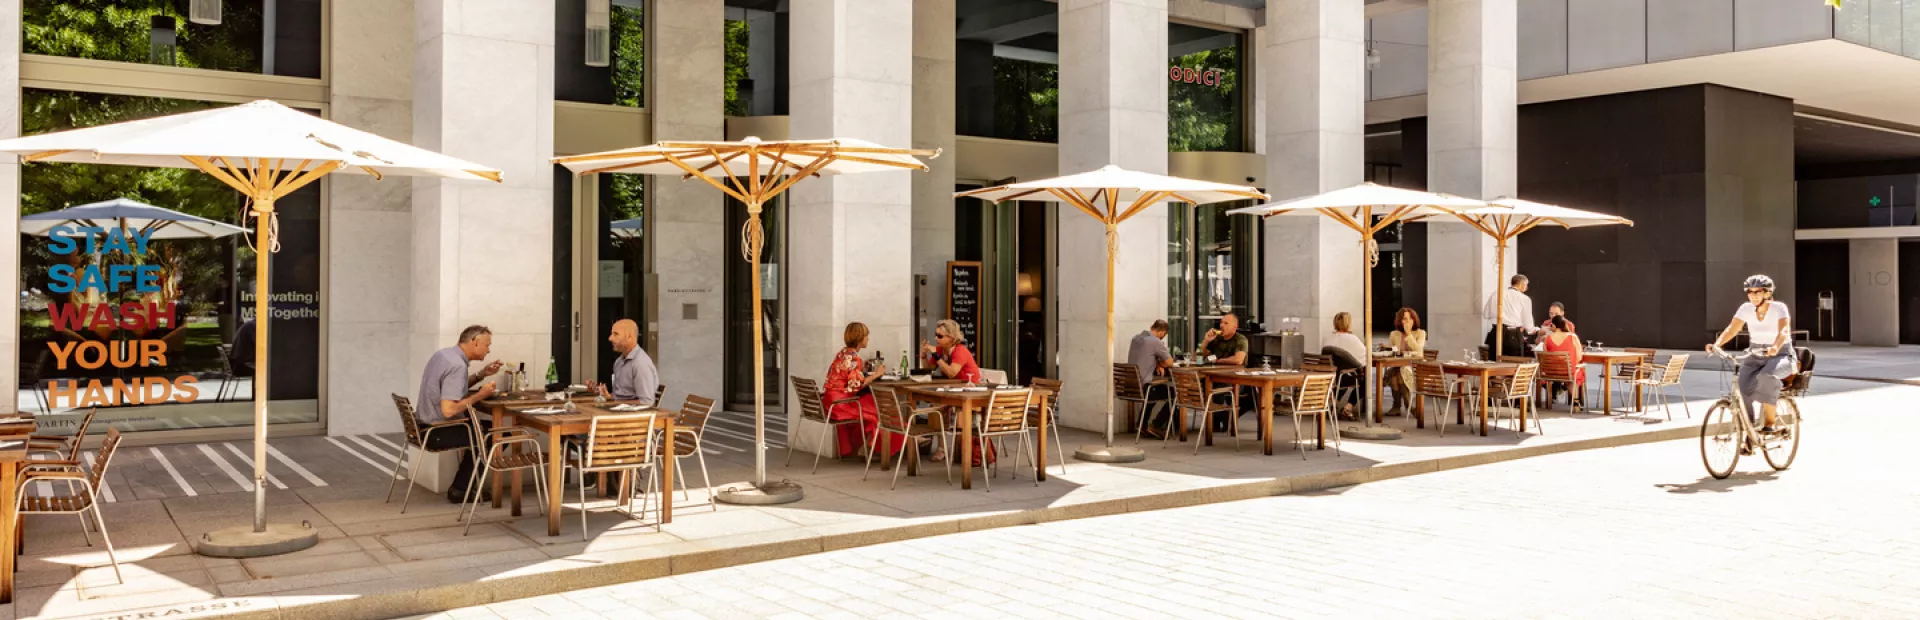 People dining on tables under parasols outside a restaurant on campus on a sunny day